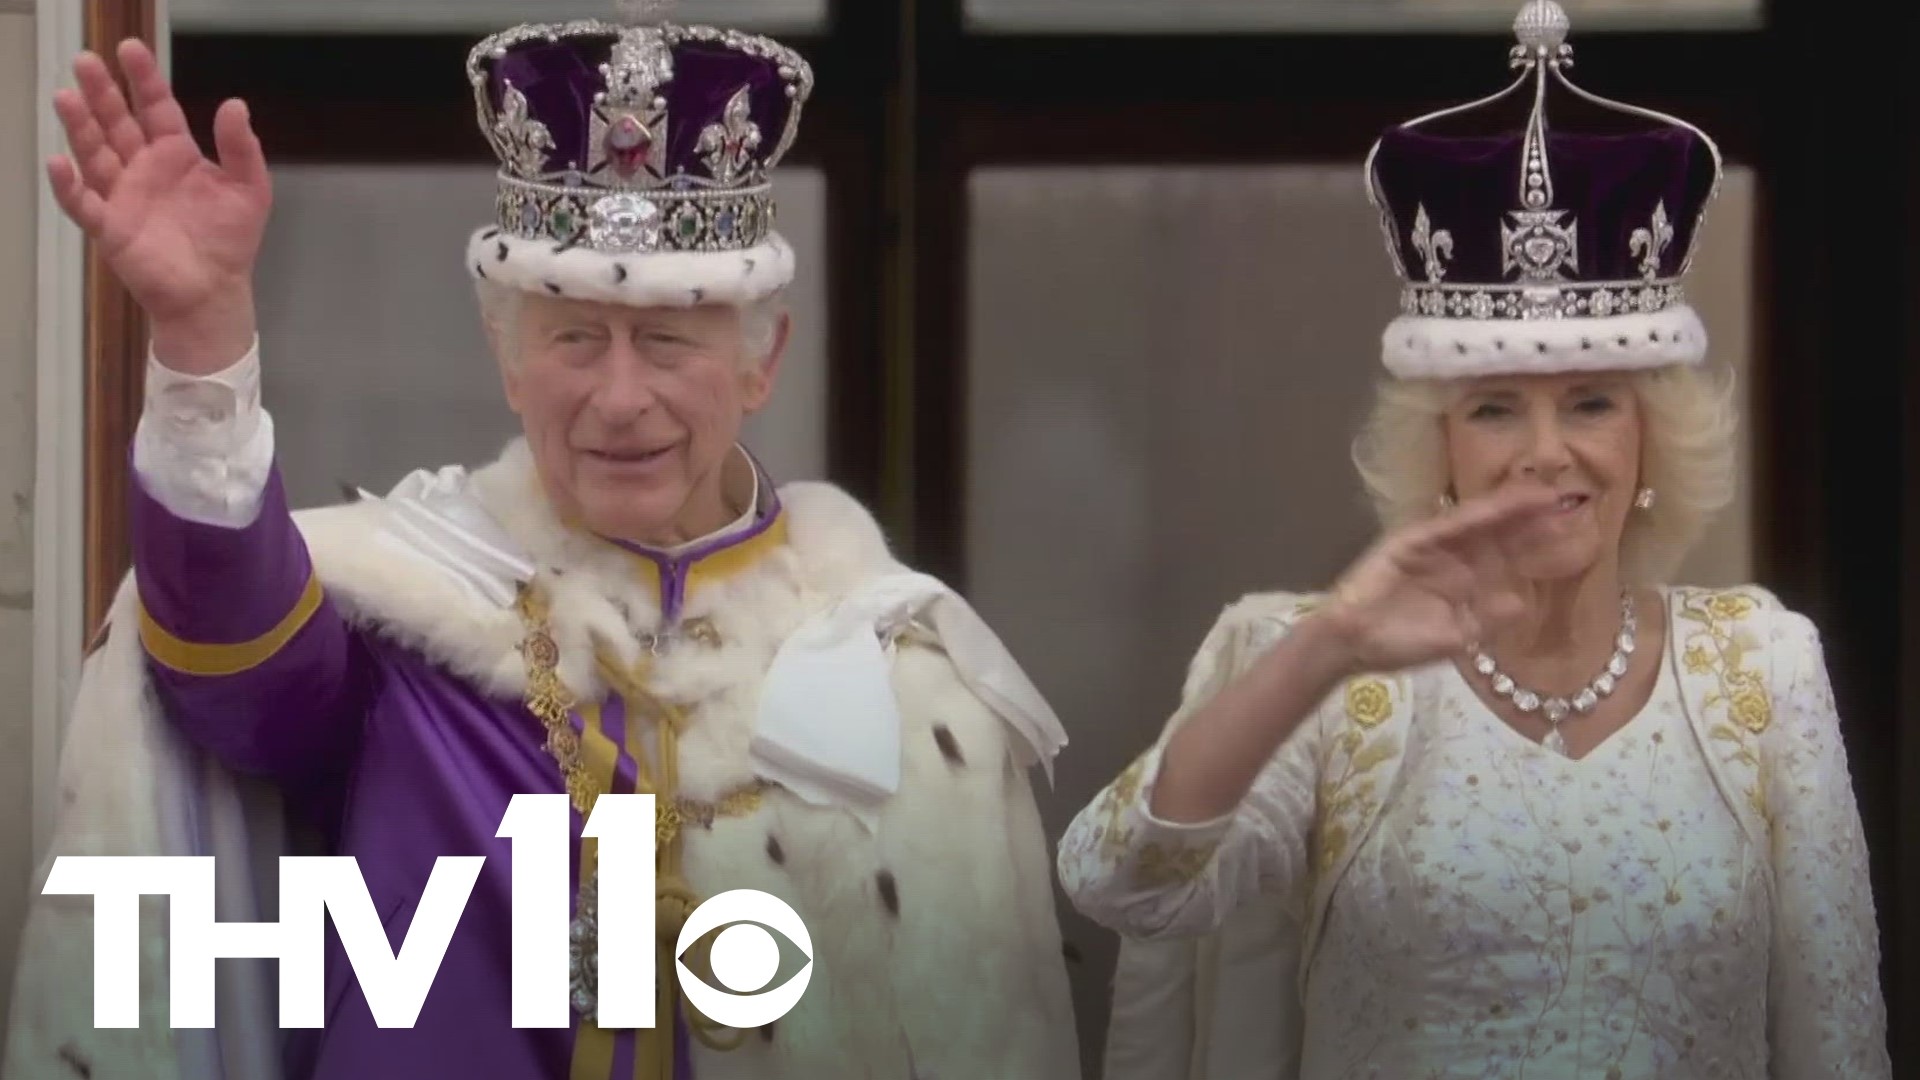 Celebrations are underway in Britain after the historic crowning of King Charles III on May 6 with pomp and circumstance.